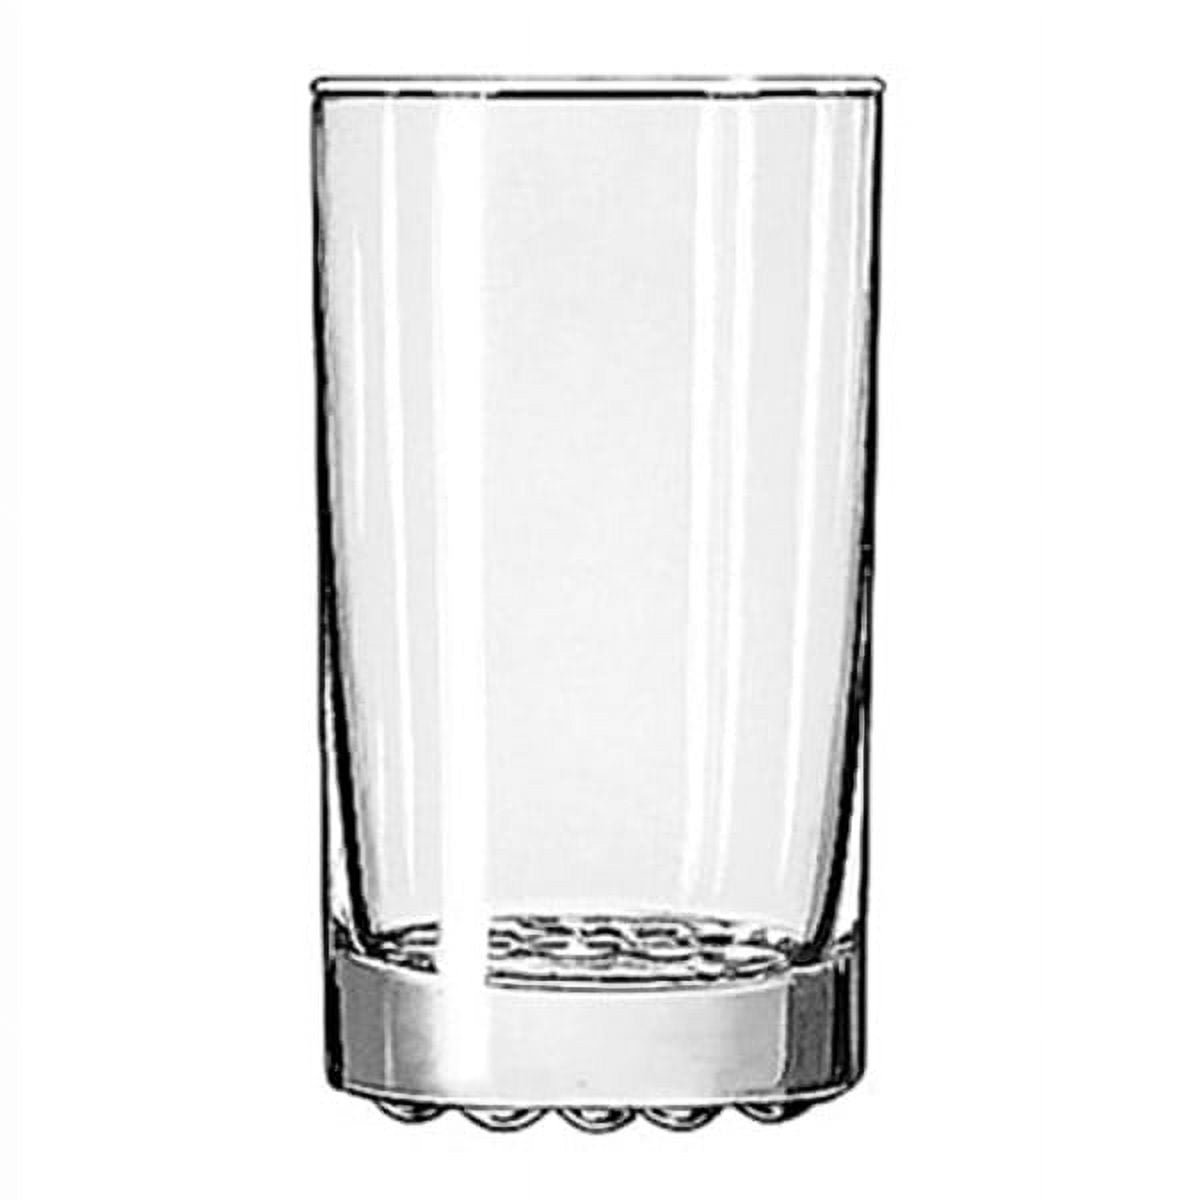 Glass Cups 12 oz,Encheng Clear Highballl Glass Juice Glass Old Fashioned  Cocktail Glass Drinking Gla…See more Glass Cups 12 oz,Encheng Clear  Highballl